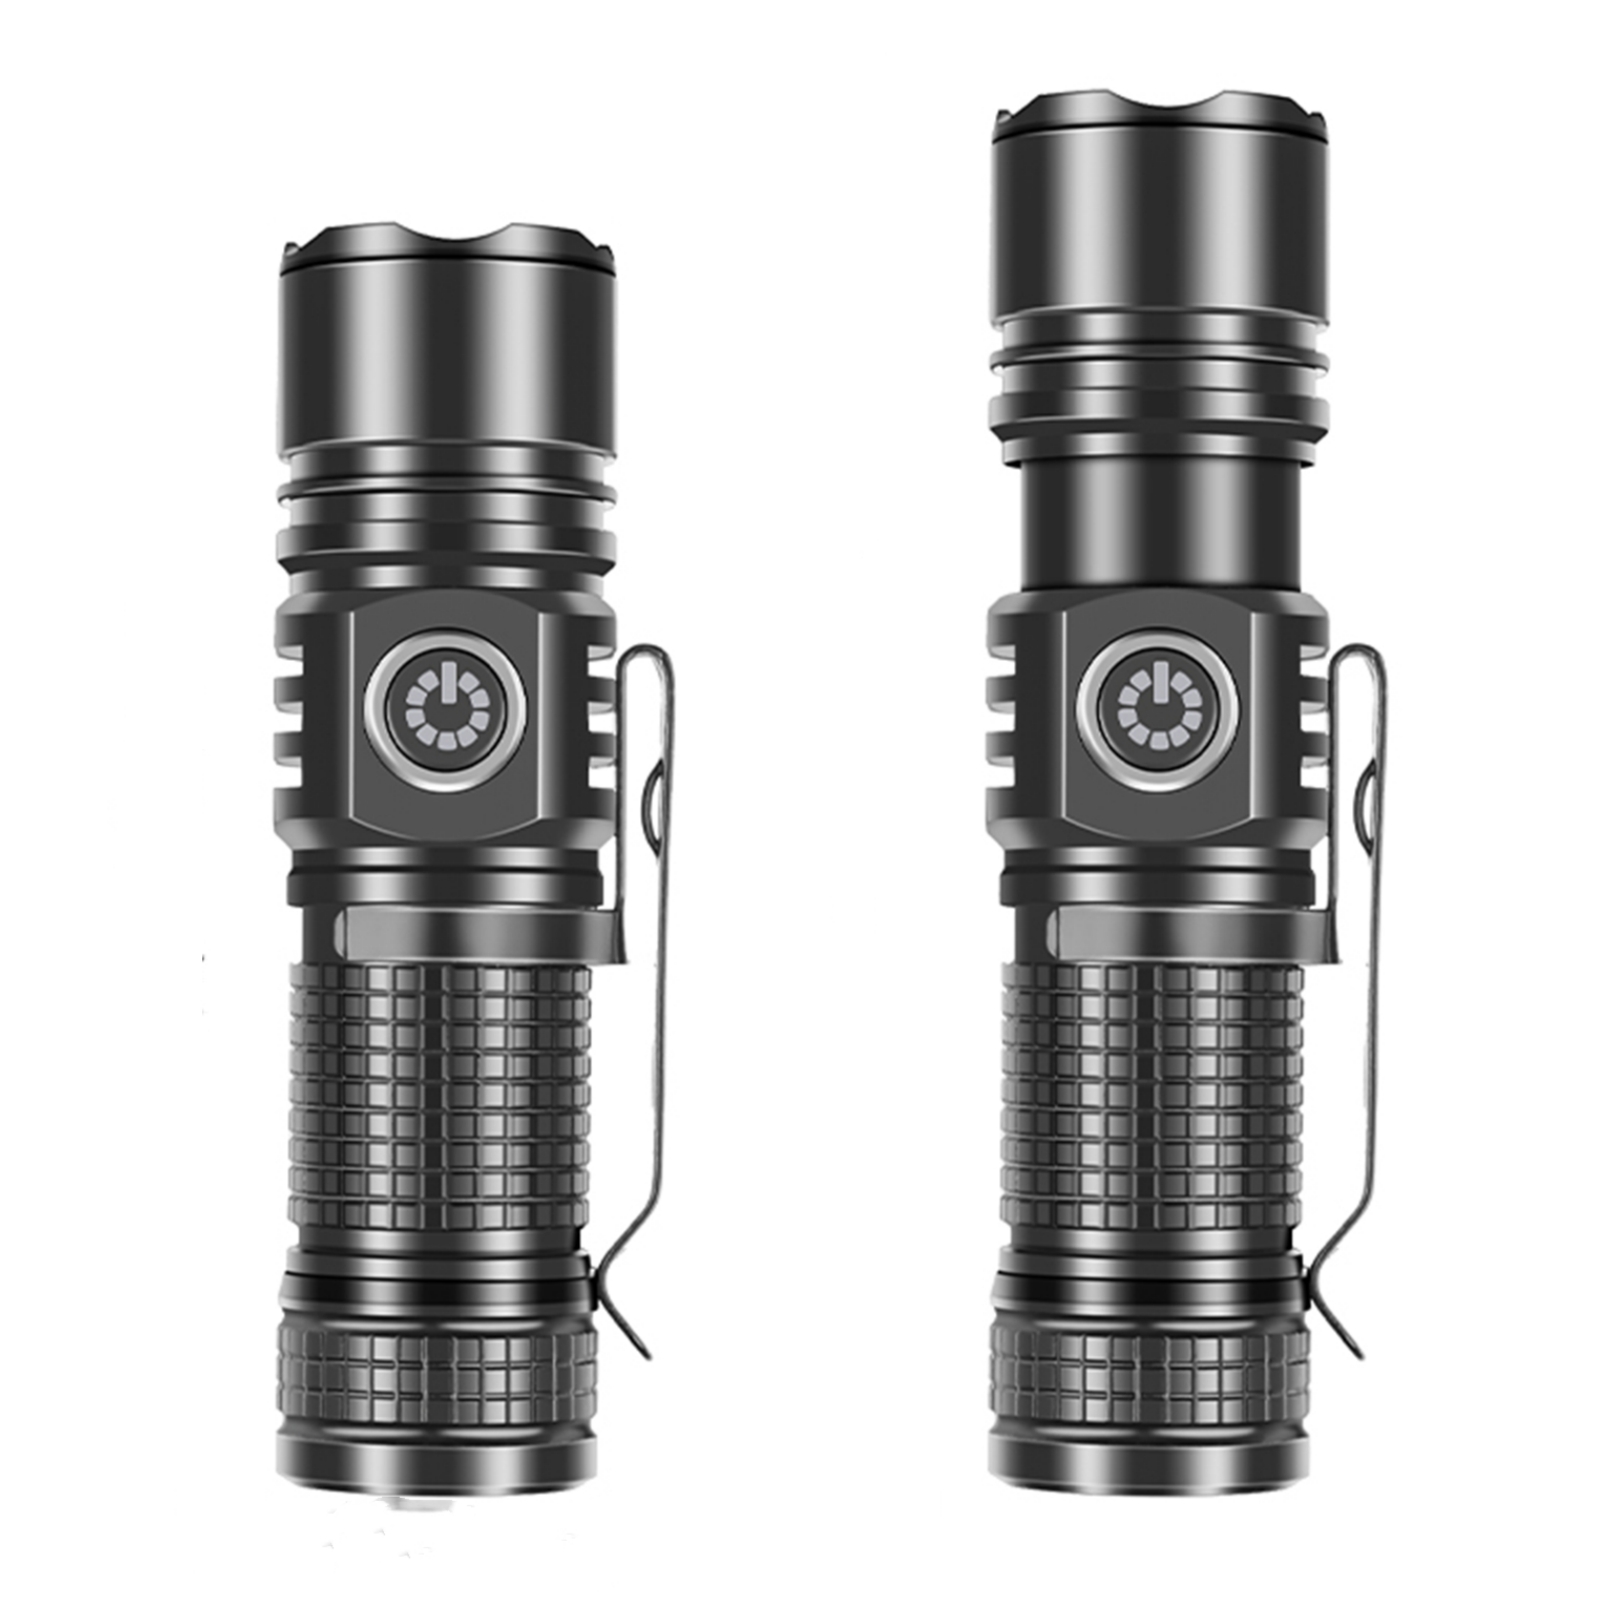 LED Flashlight 30W Strong Light Rechargeable Flash Light 3 Modes 30W Multi-functional Waterproof Torch